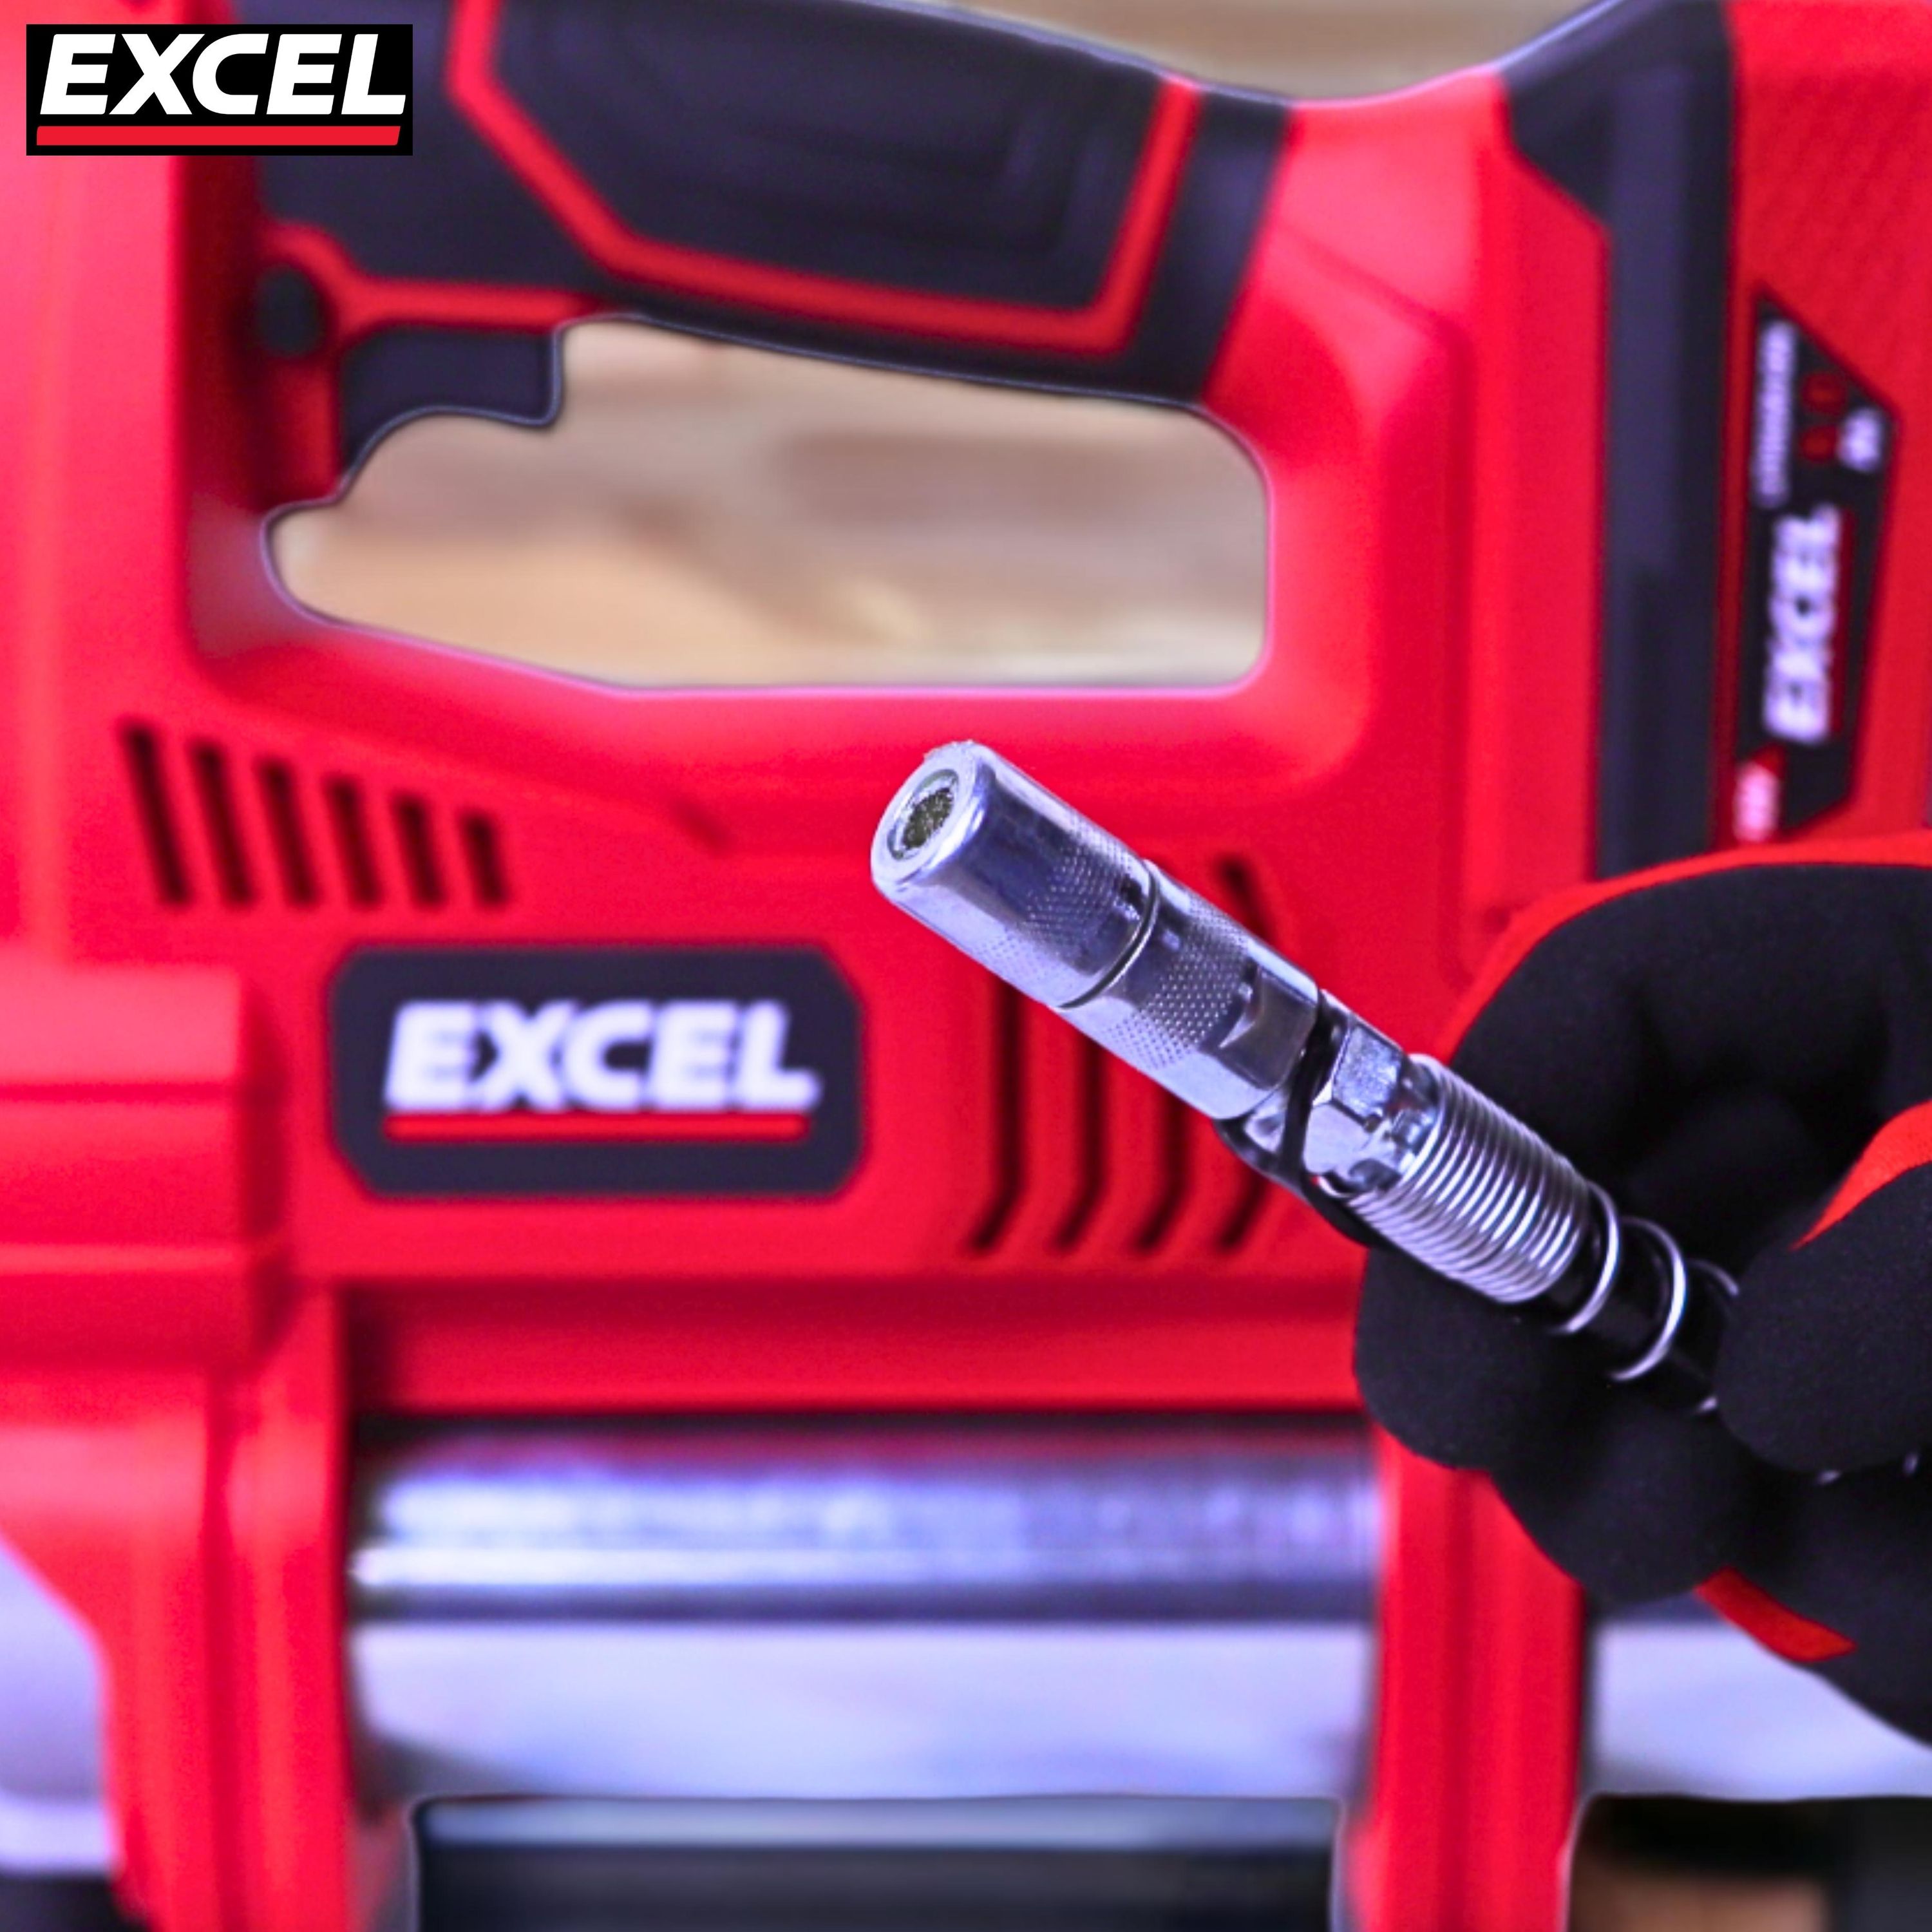 Excel 18V Cordless Grease Gun with 1 x 5.0Ah Battery Charger & Bag